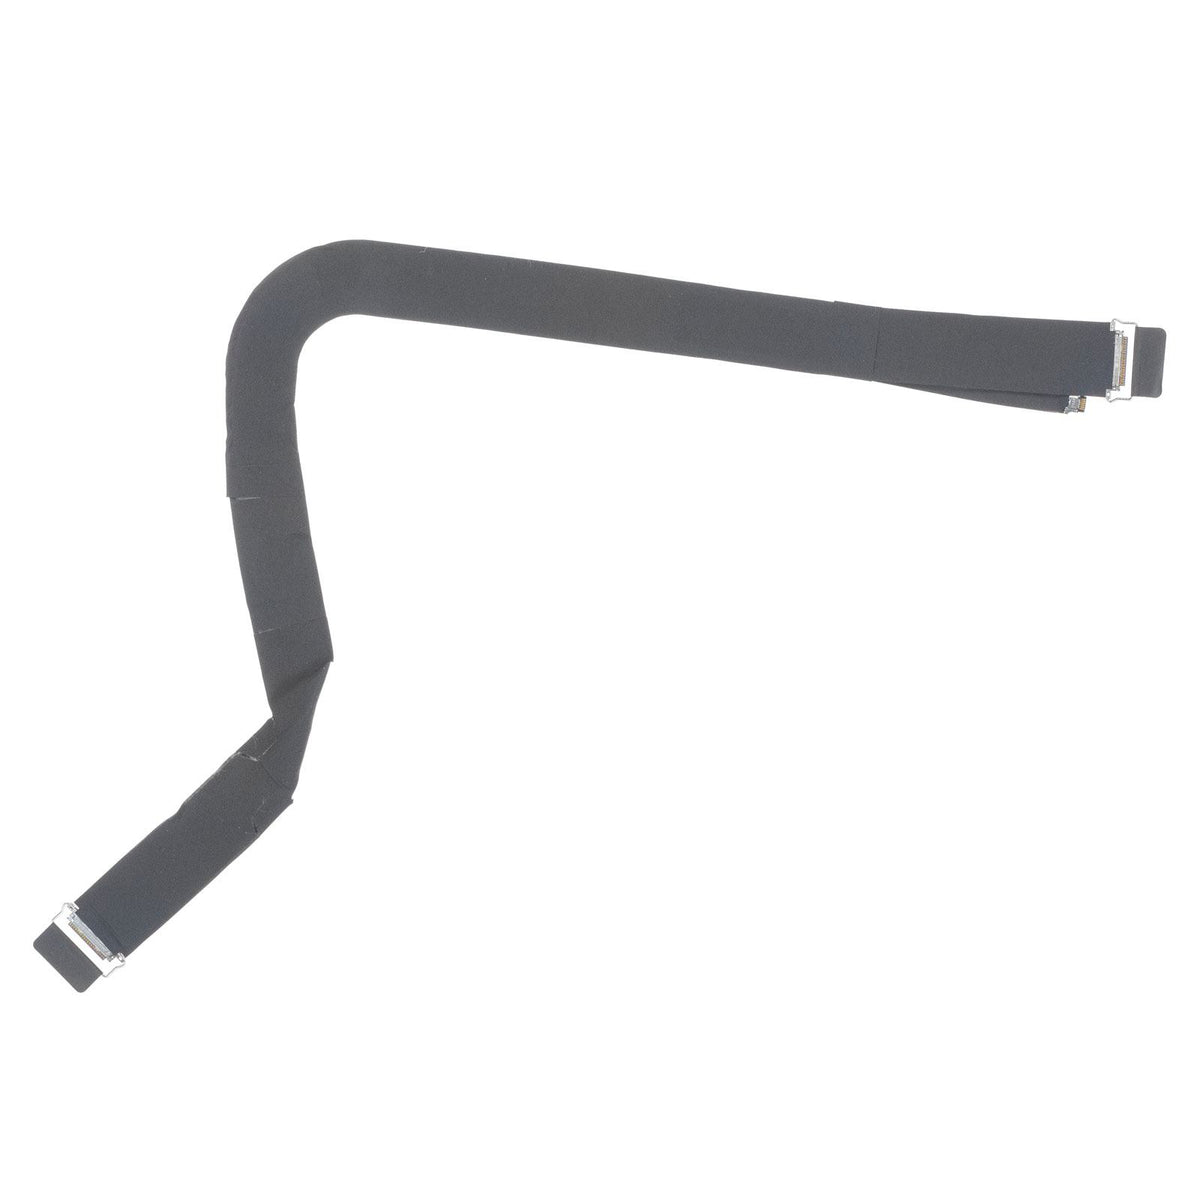 CAMERA & MICROPHONE CABLE FOR IMAC 27" A1419 (LATE 2012,LATE 2013)